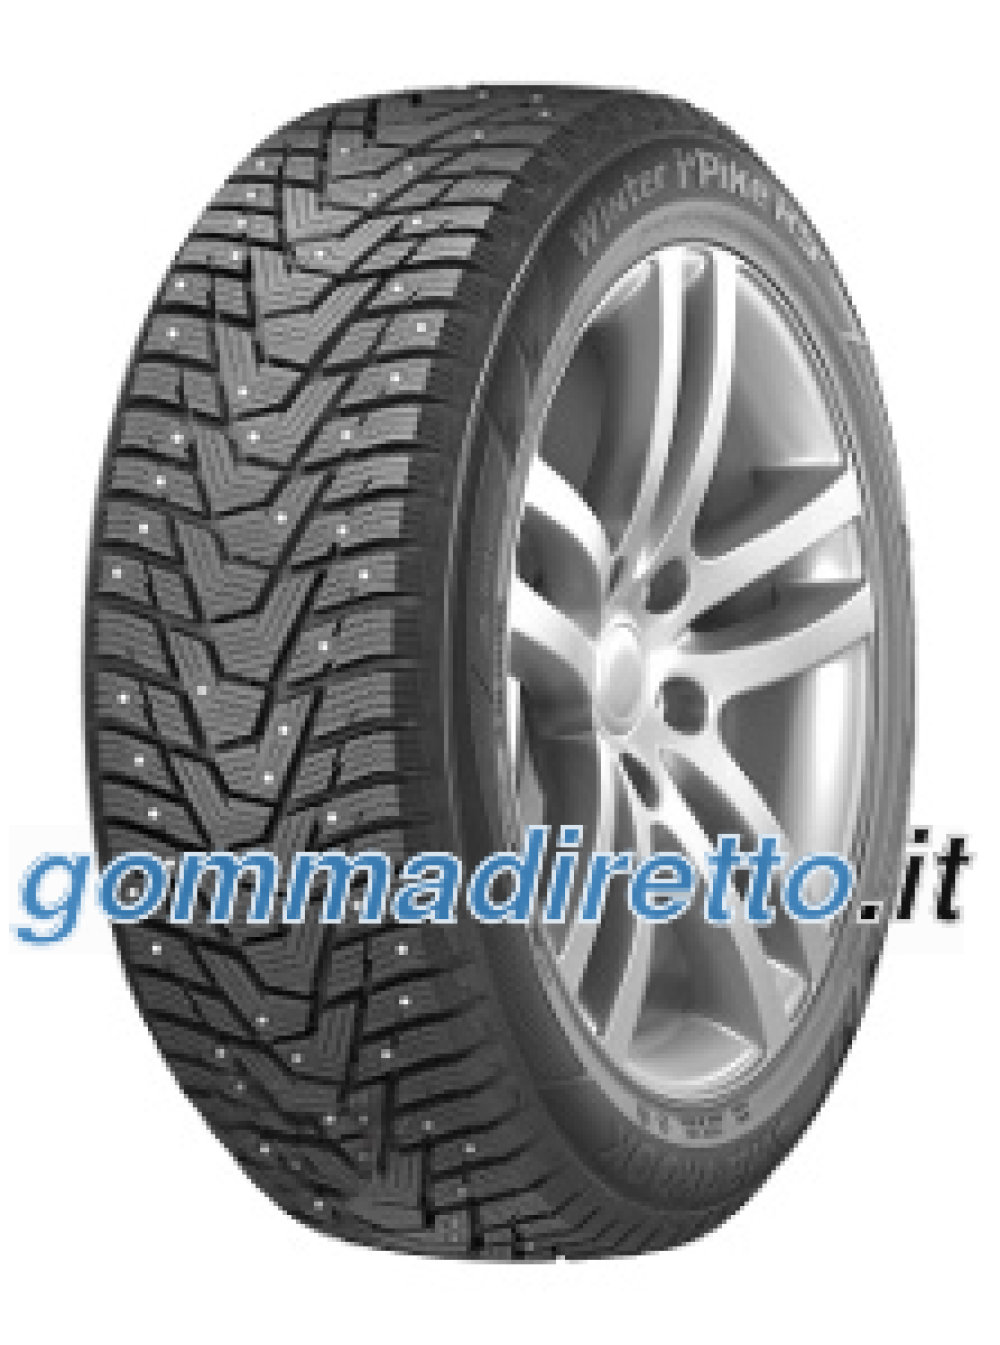 Image of Hankook Winter I*Pike RS2 W429 ( 155/80 R13 79T, pneumatico chiodato SBL )